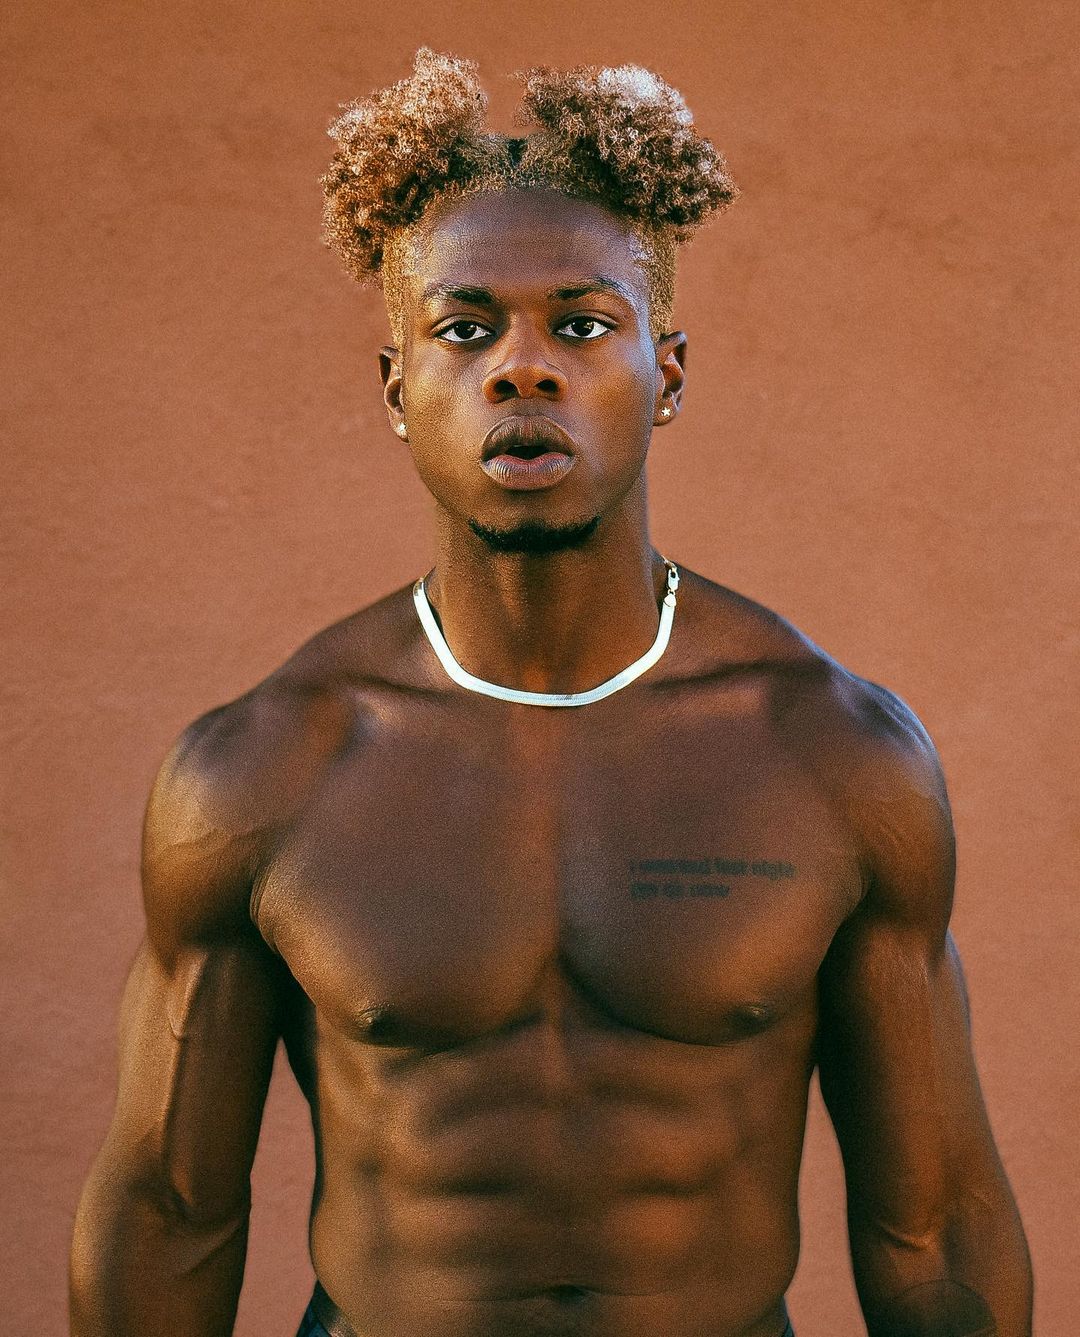 Curly haired man posting with no shirt while wearing a gold chain